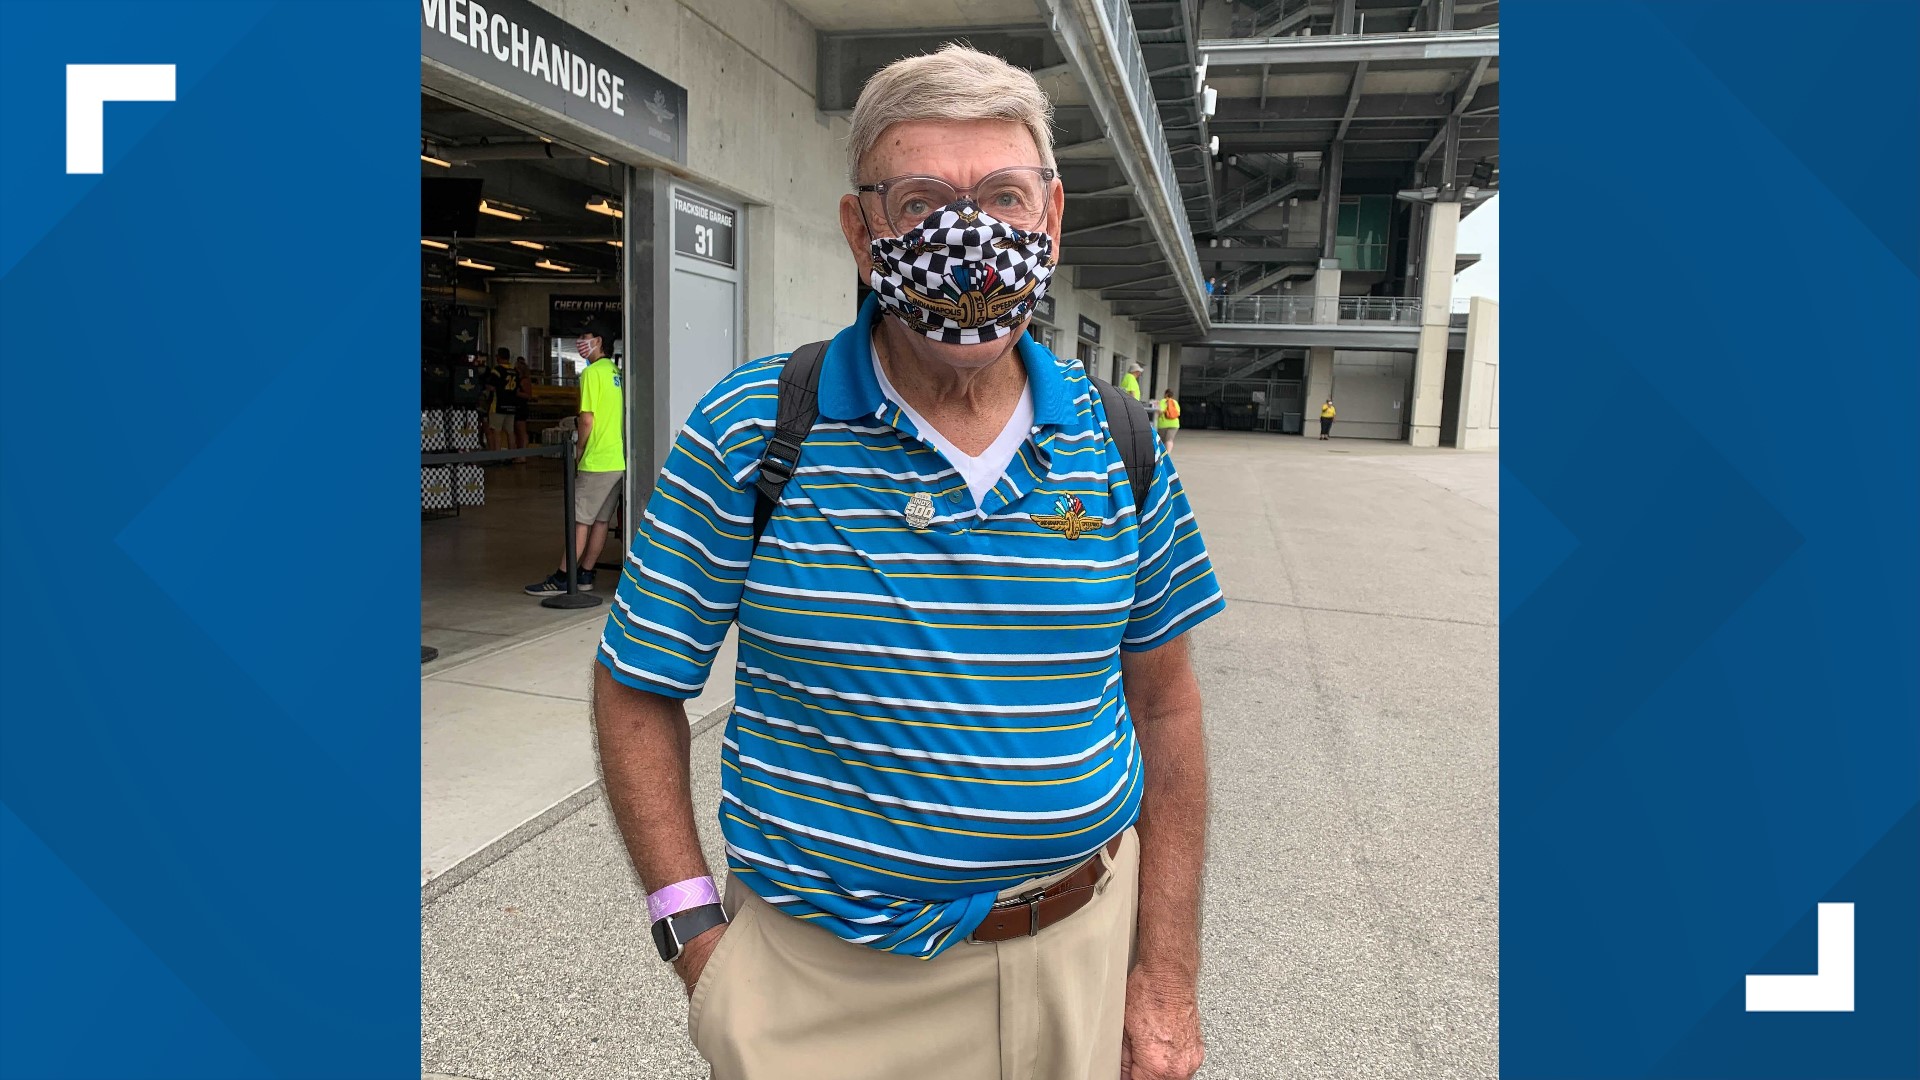 Butch Welsch has gone to the Indy 500 every year since he was 5 years old and he's watched from the same seat since 1961 when the grandstand was built.